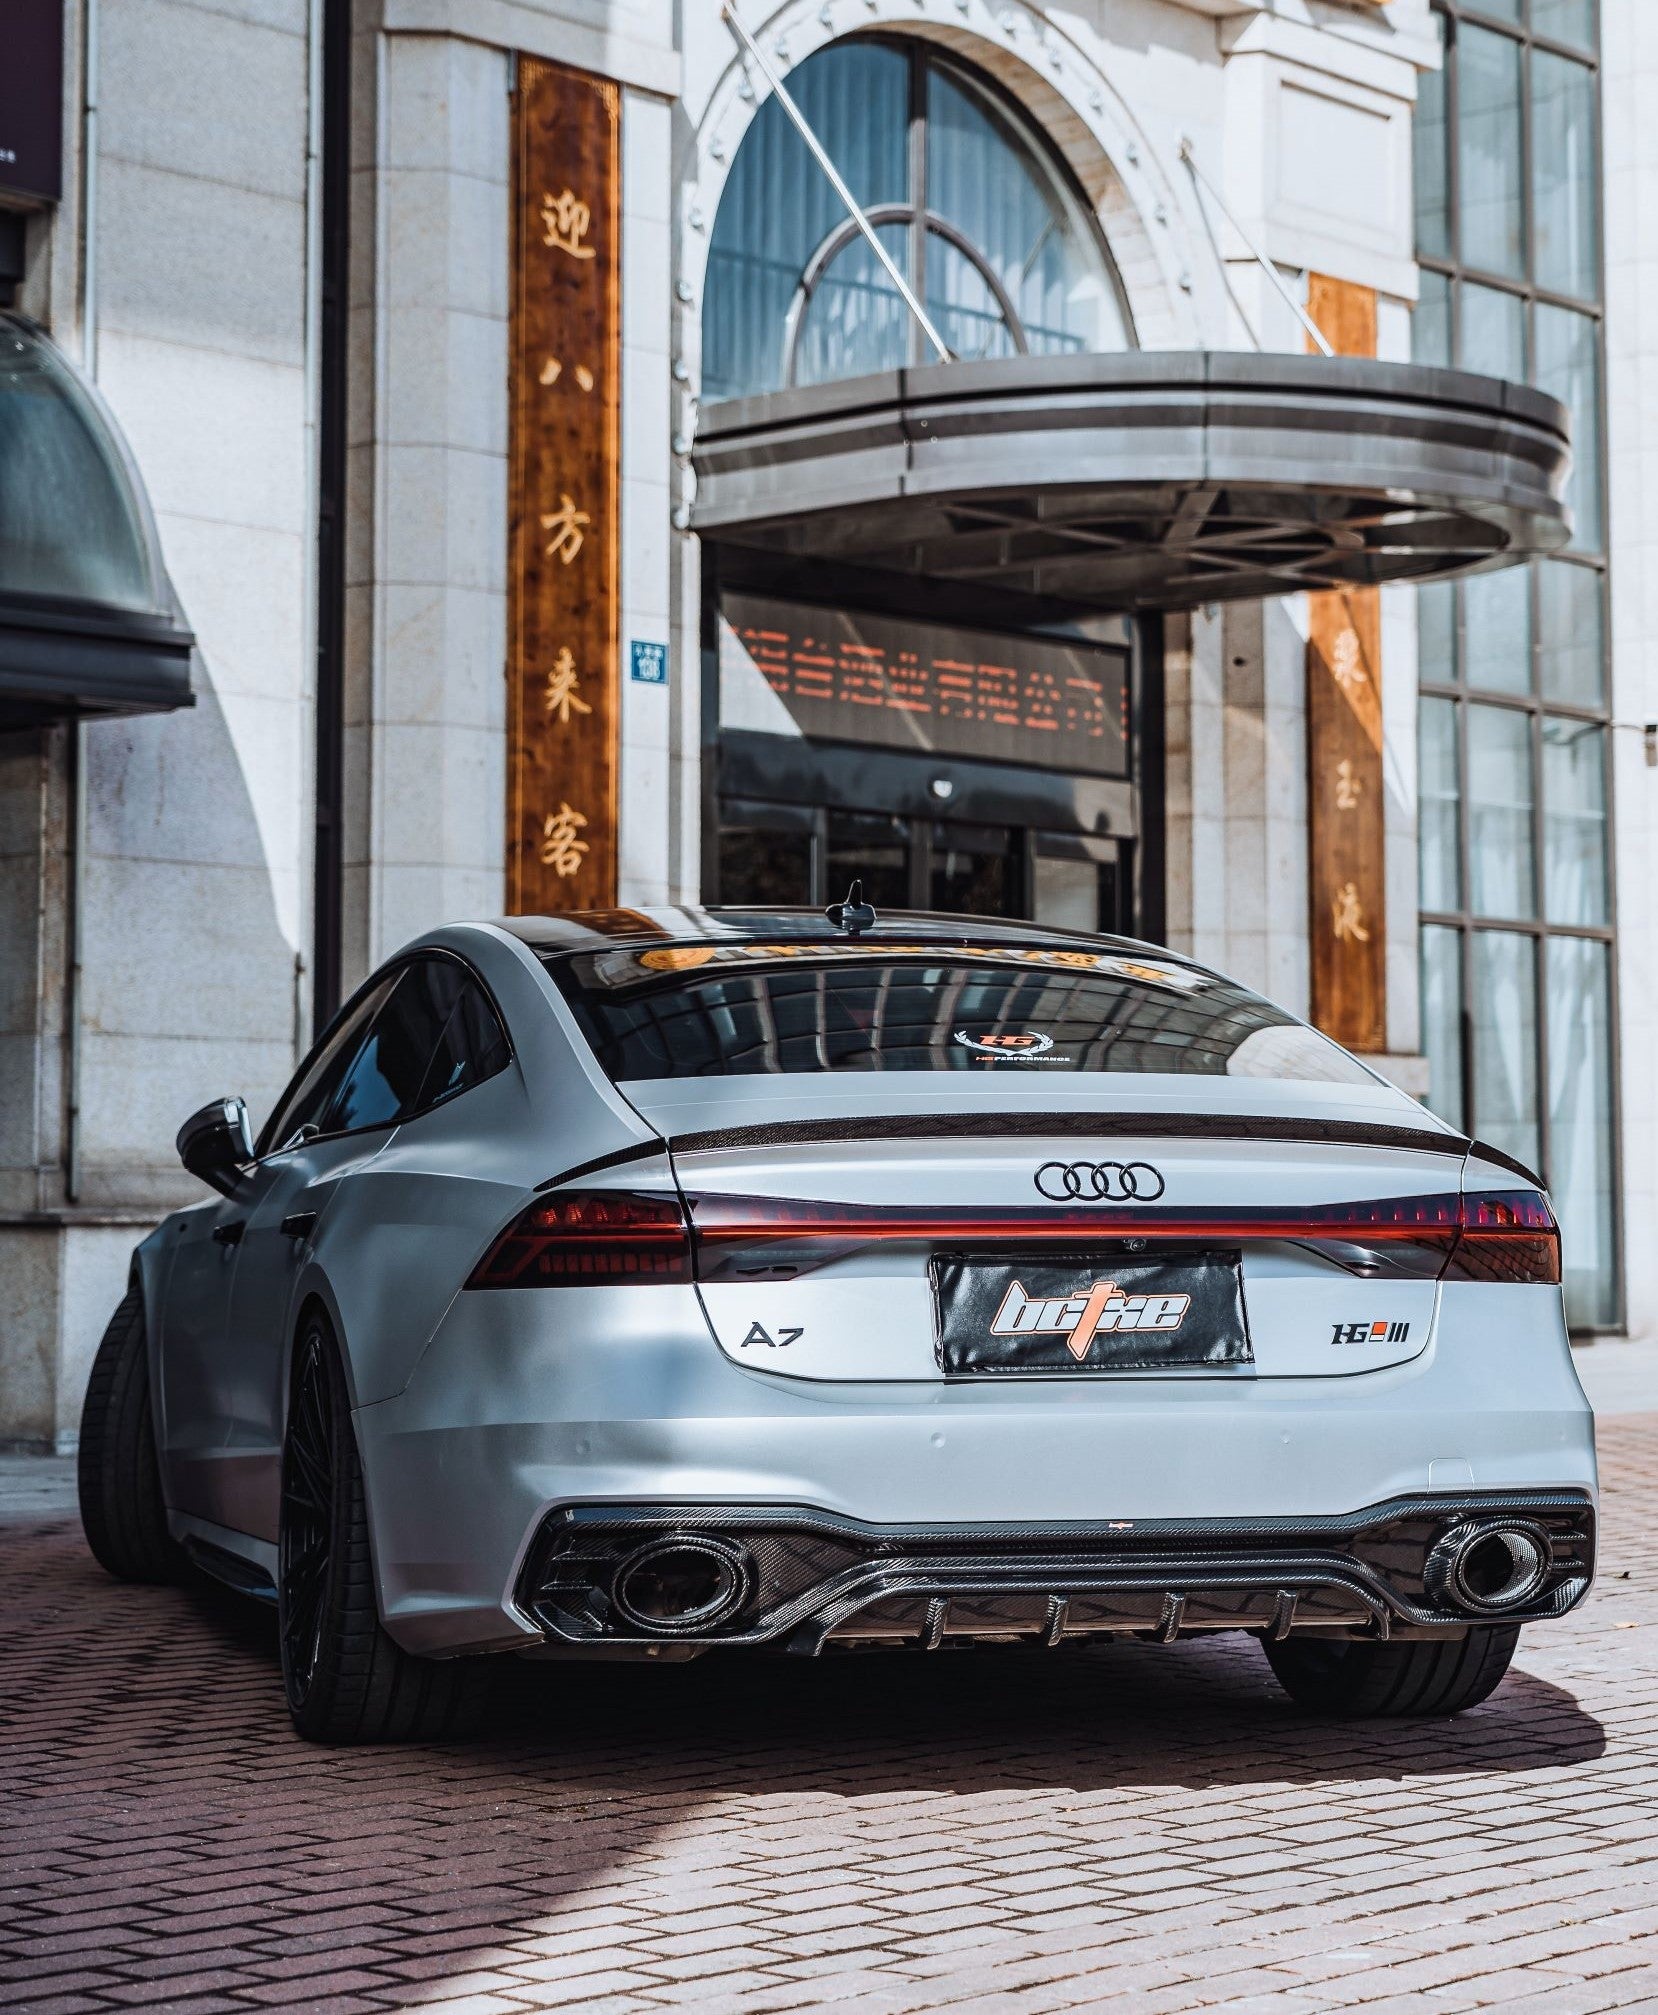 BCTXE Tuning Carbon Fiber Rear Diffuser Ver.2 for Audi S7 & A7 S Line 2019-ON C8